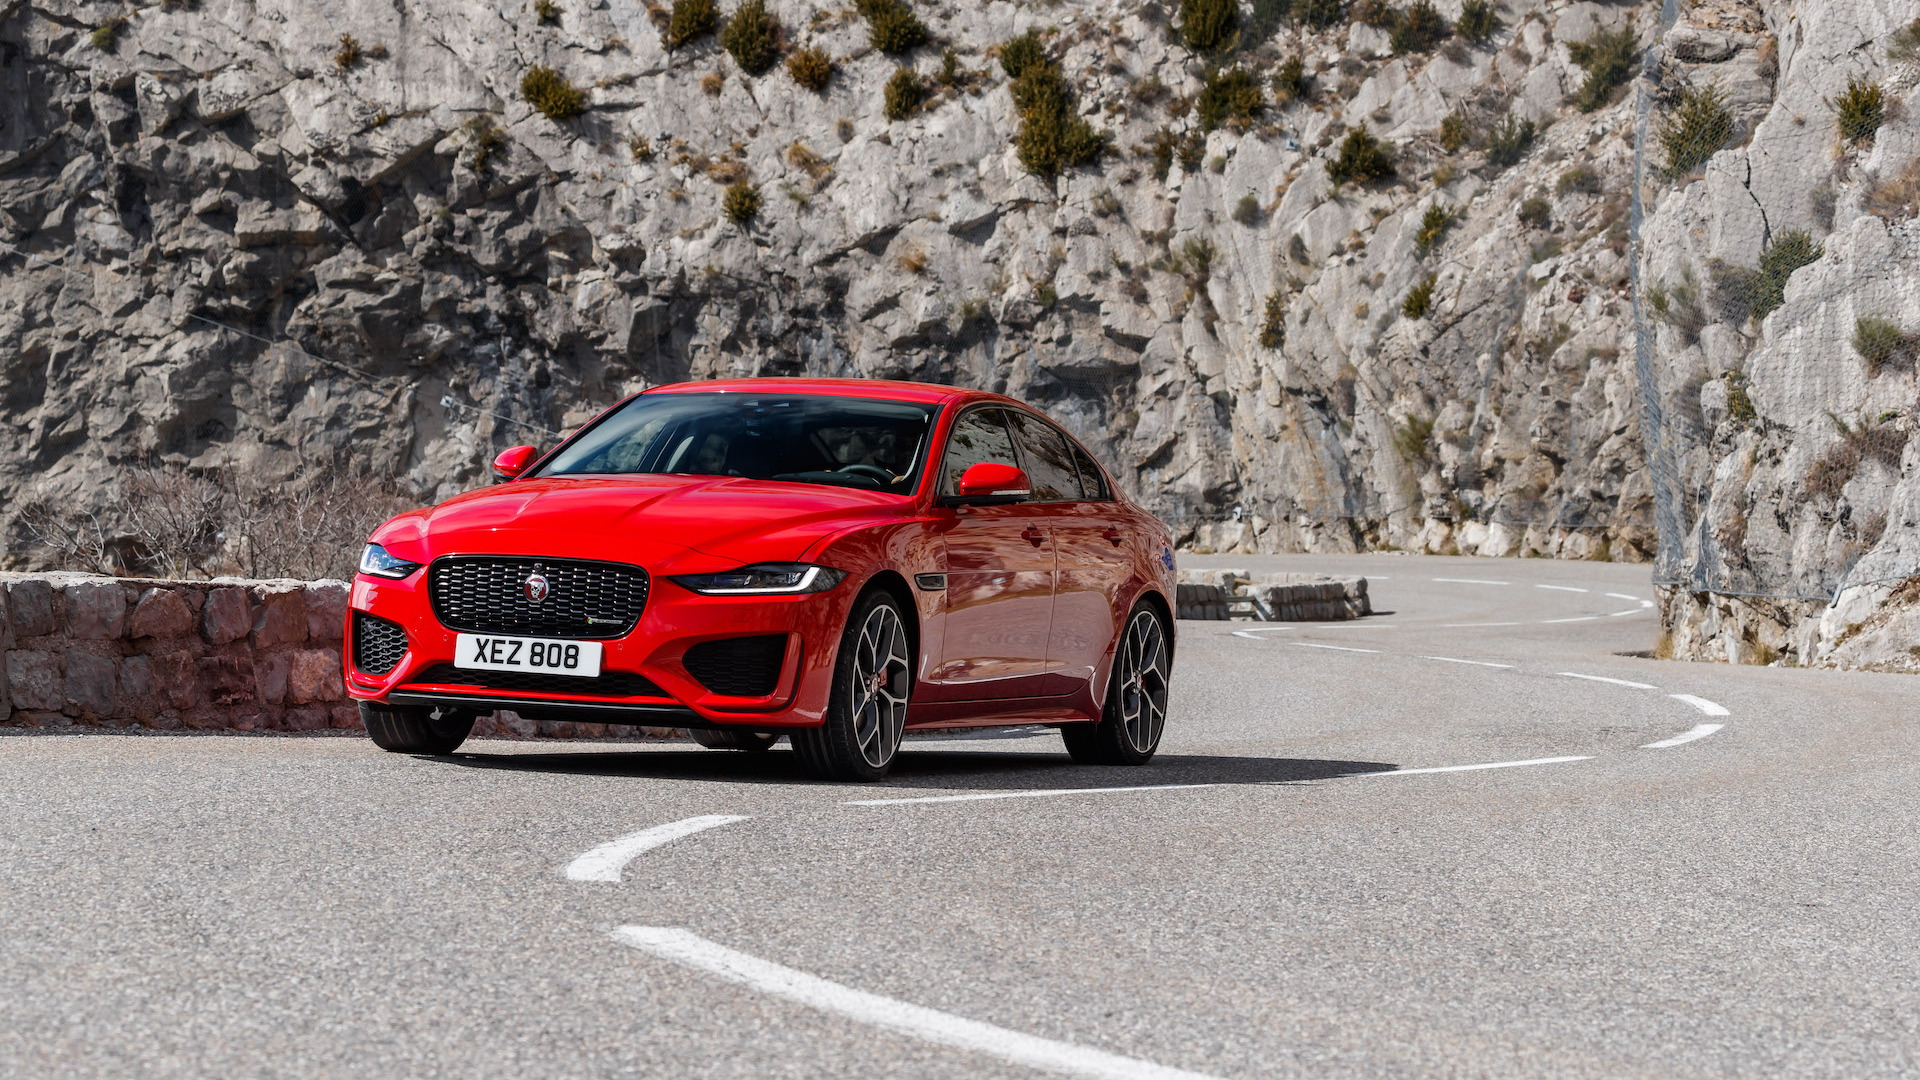 First drive review: The 2020 Jaguar XE puts gravity on hold